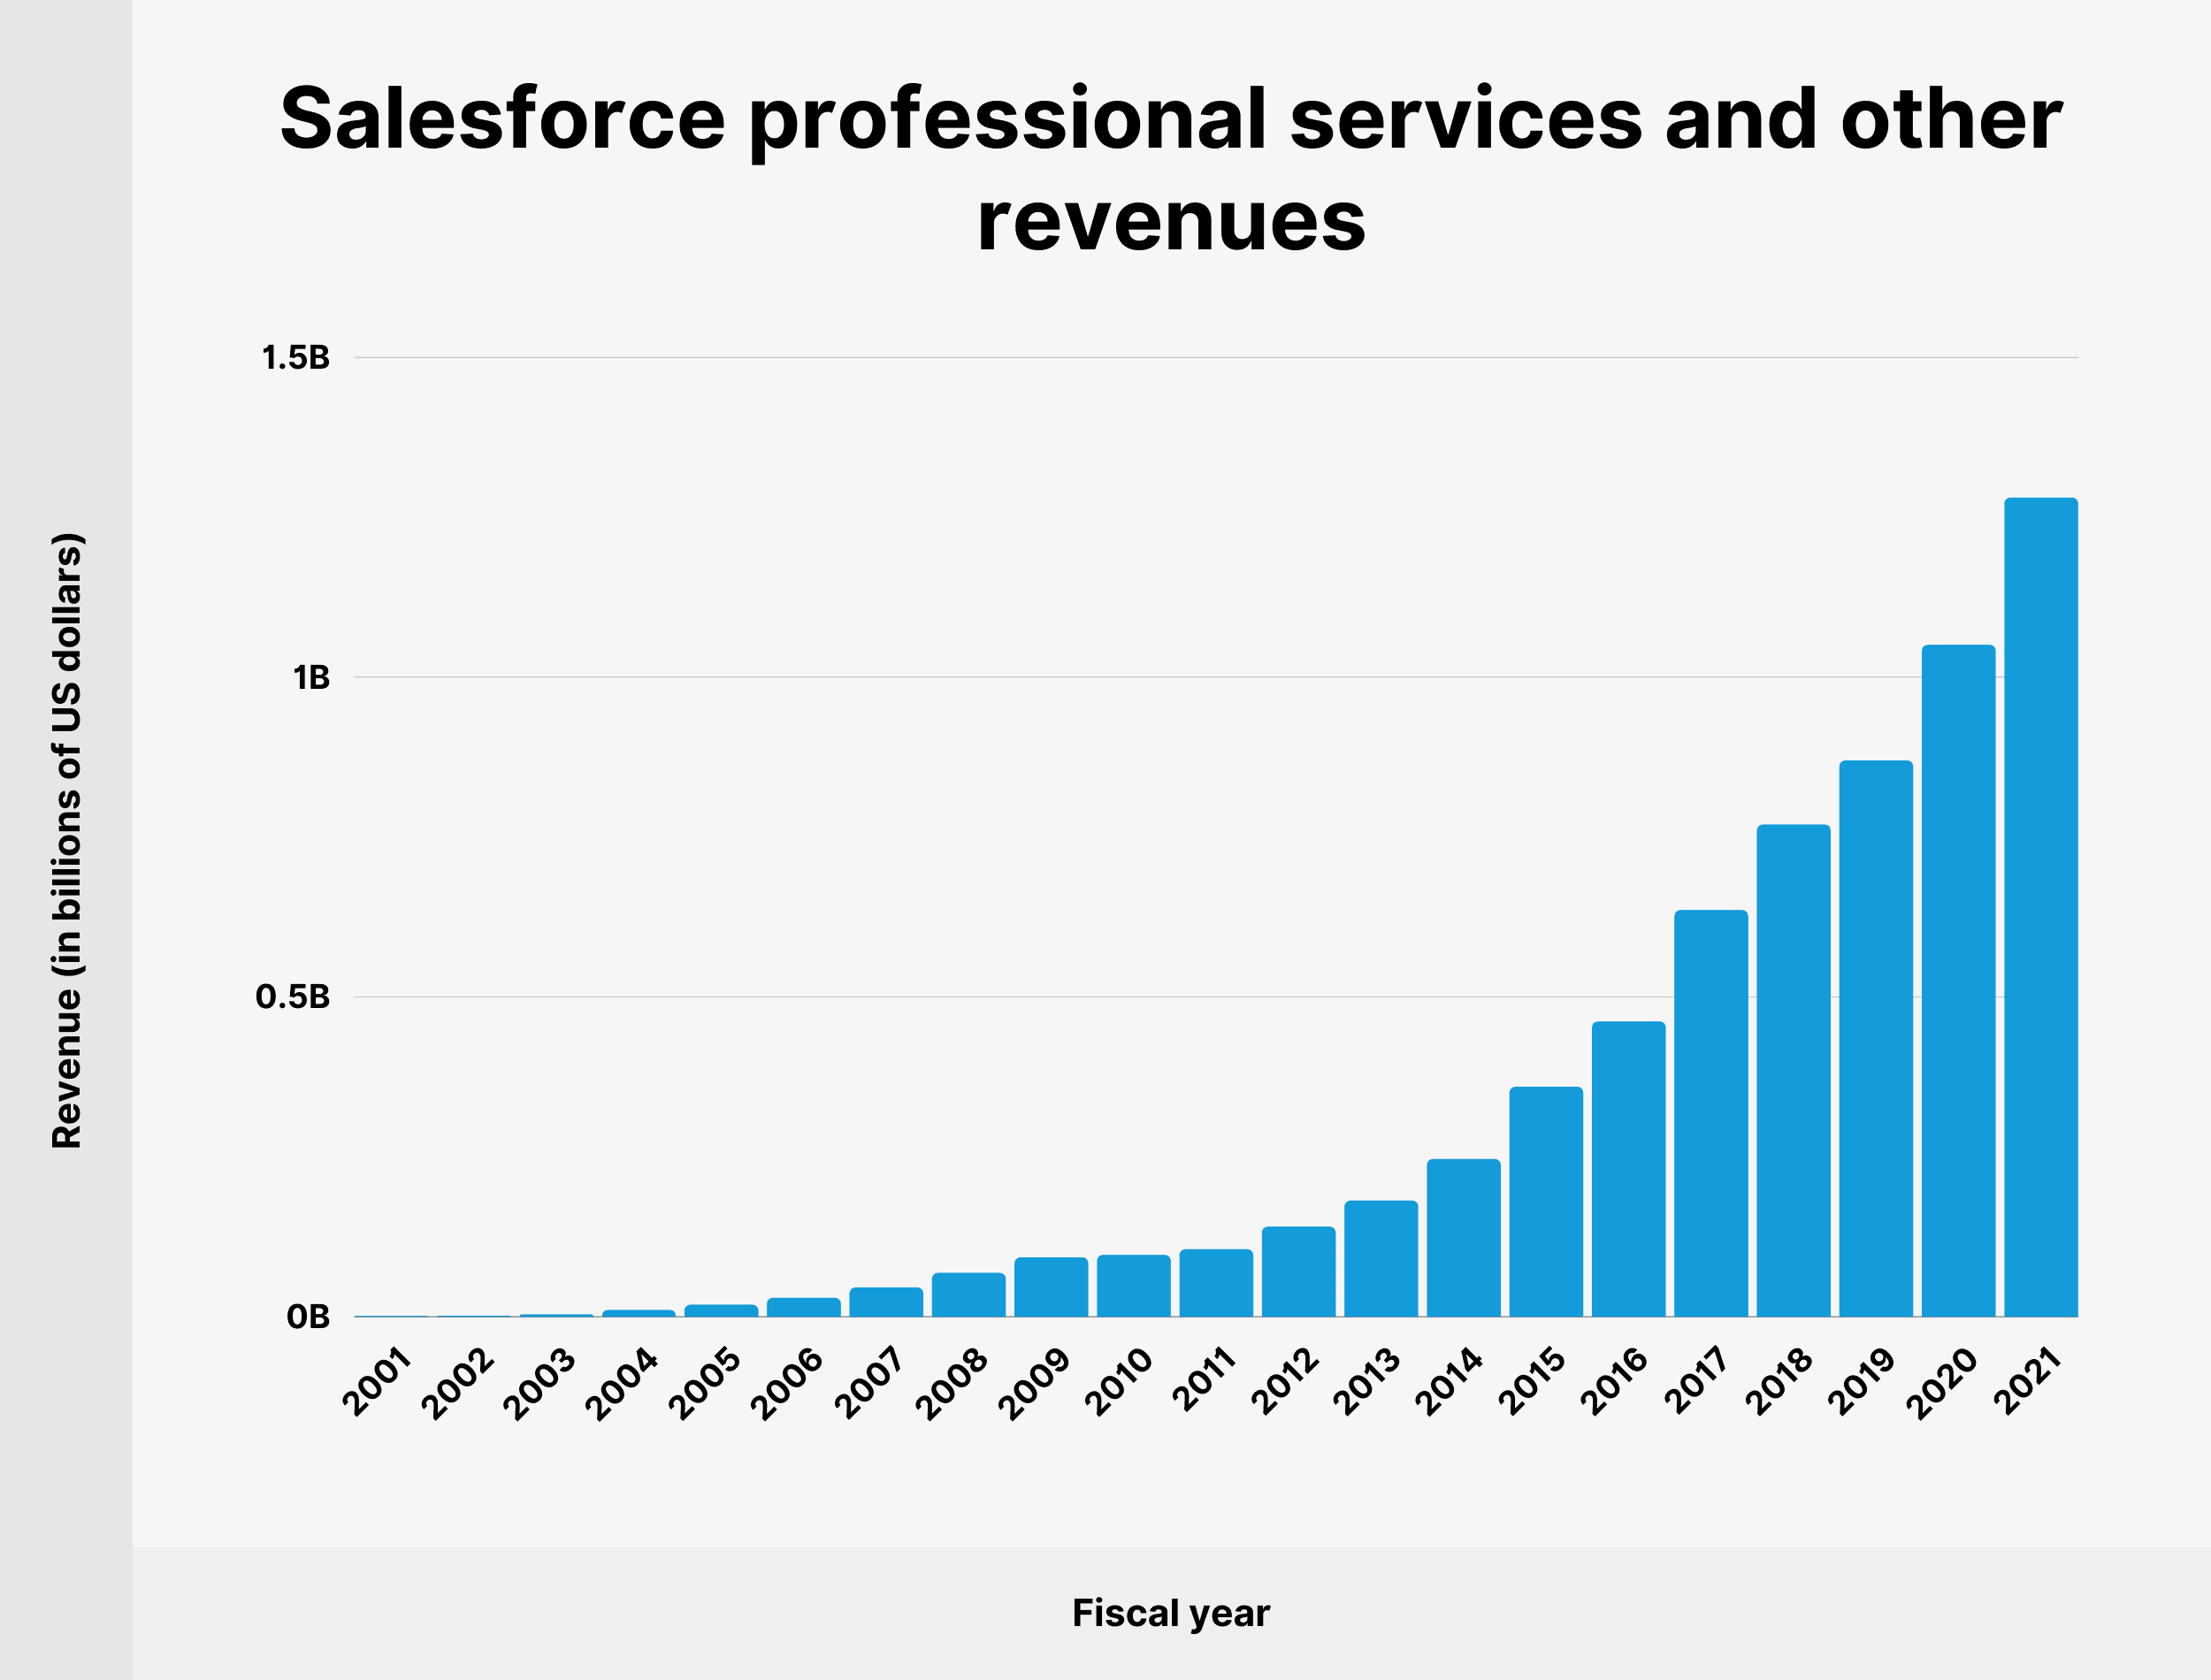 Salesforce professional services and other revenues